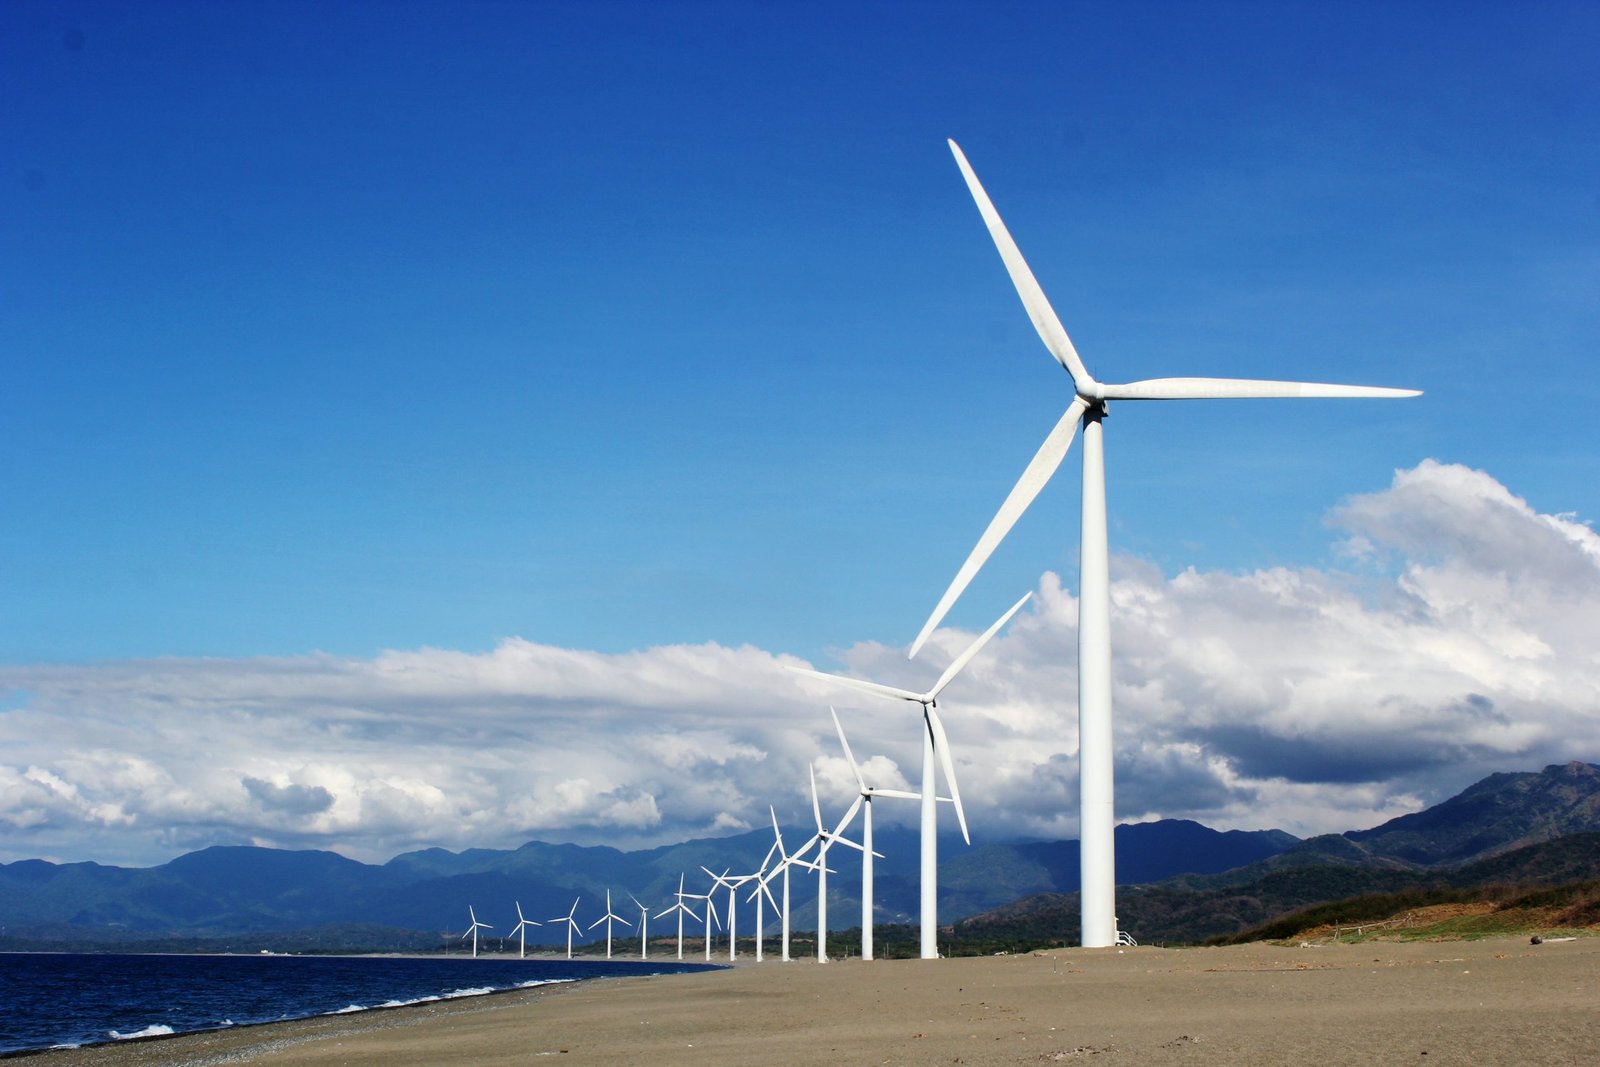 WMO encourages faster action on transition to clean energy